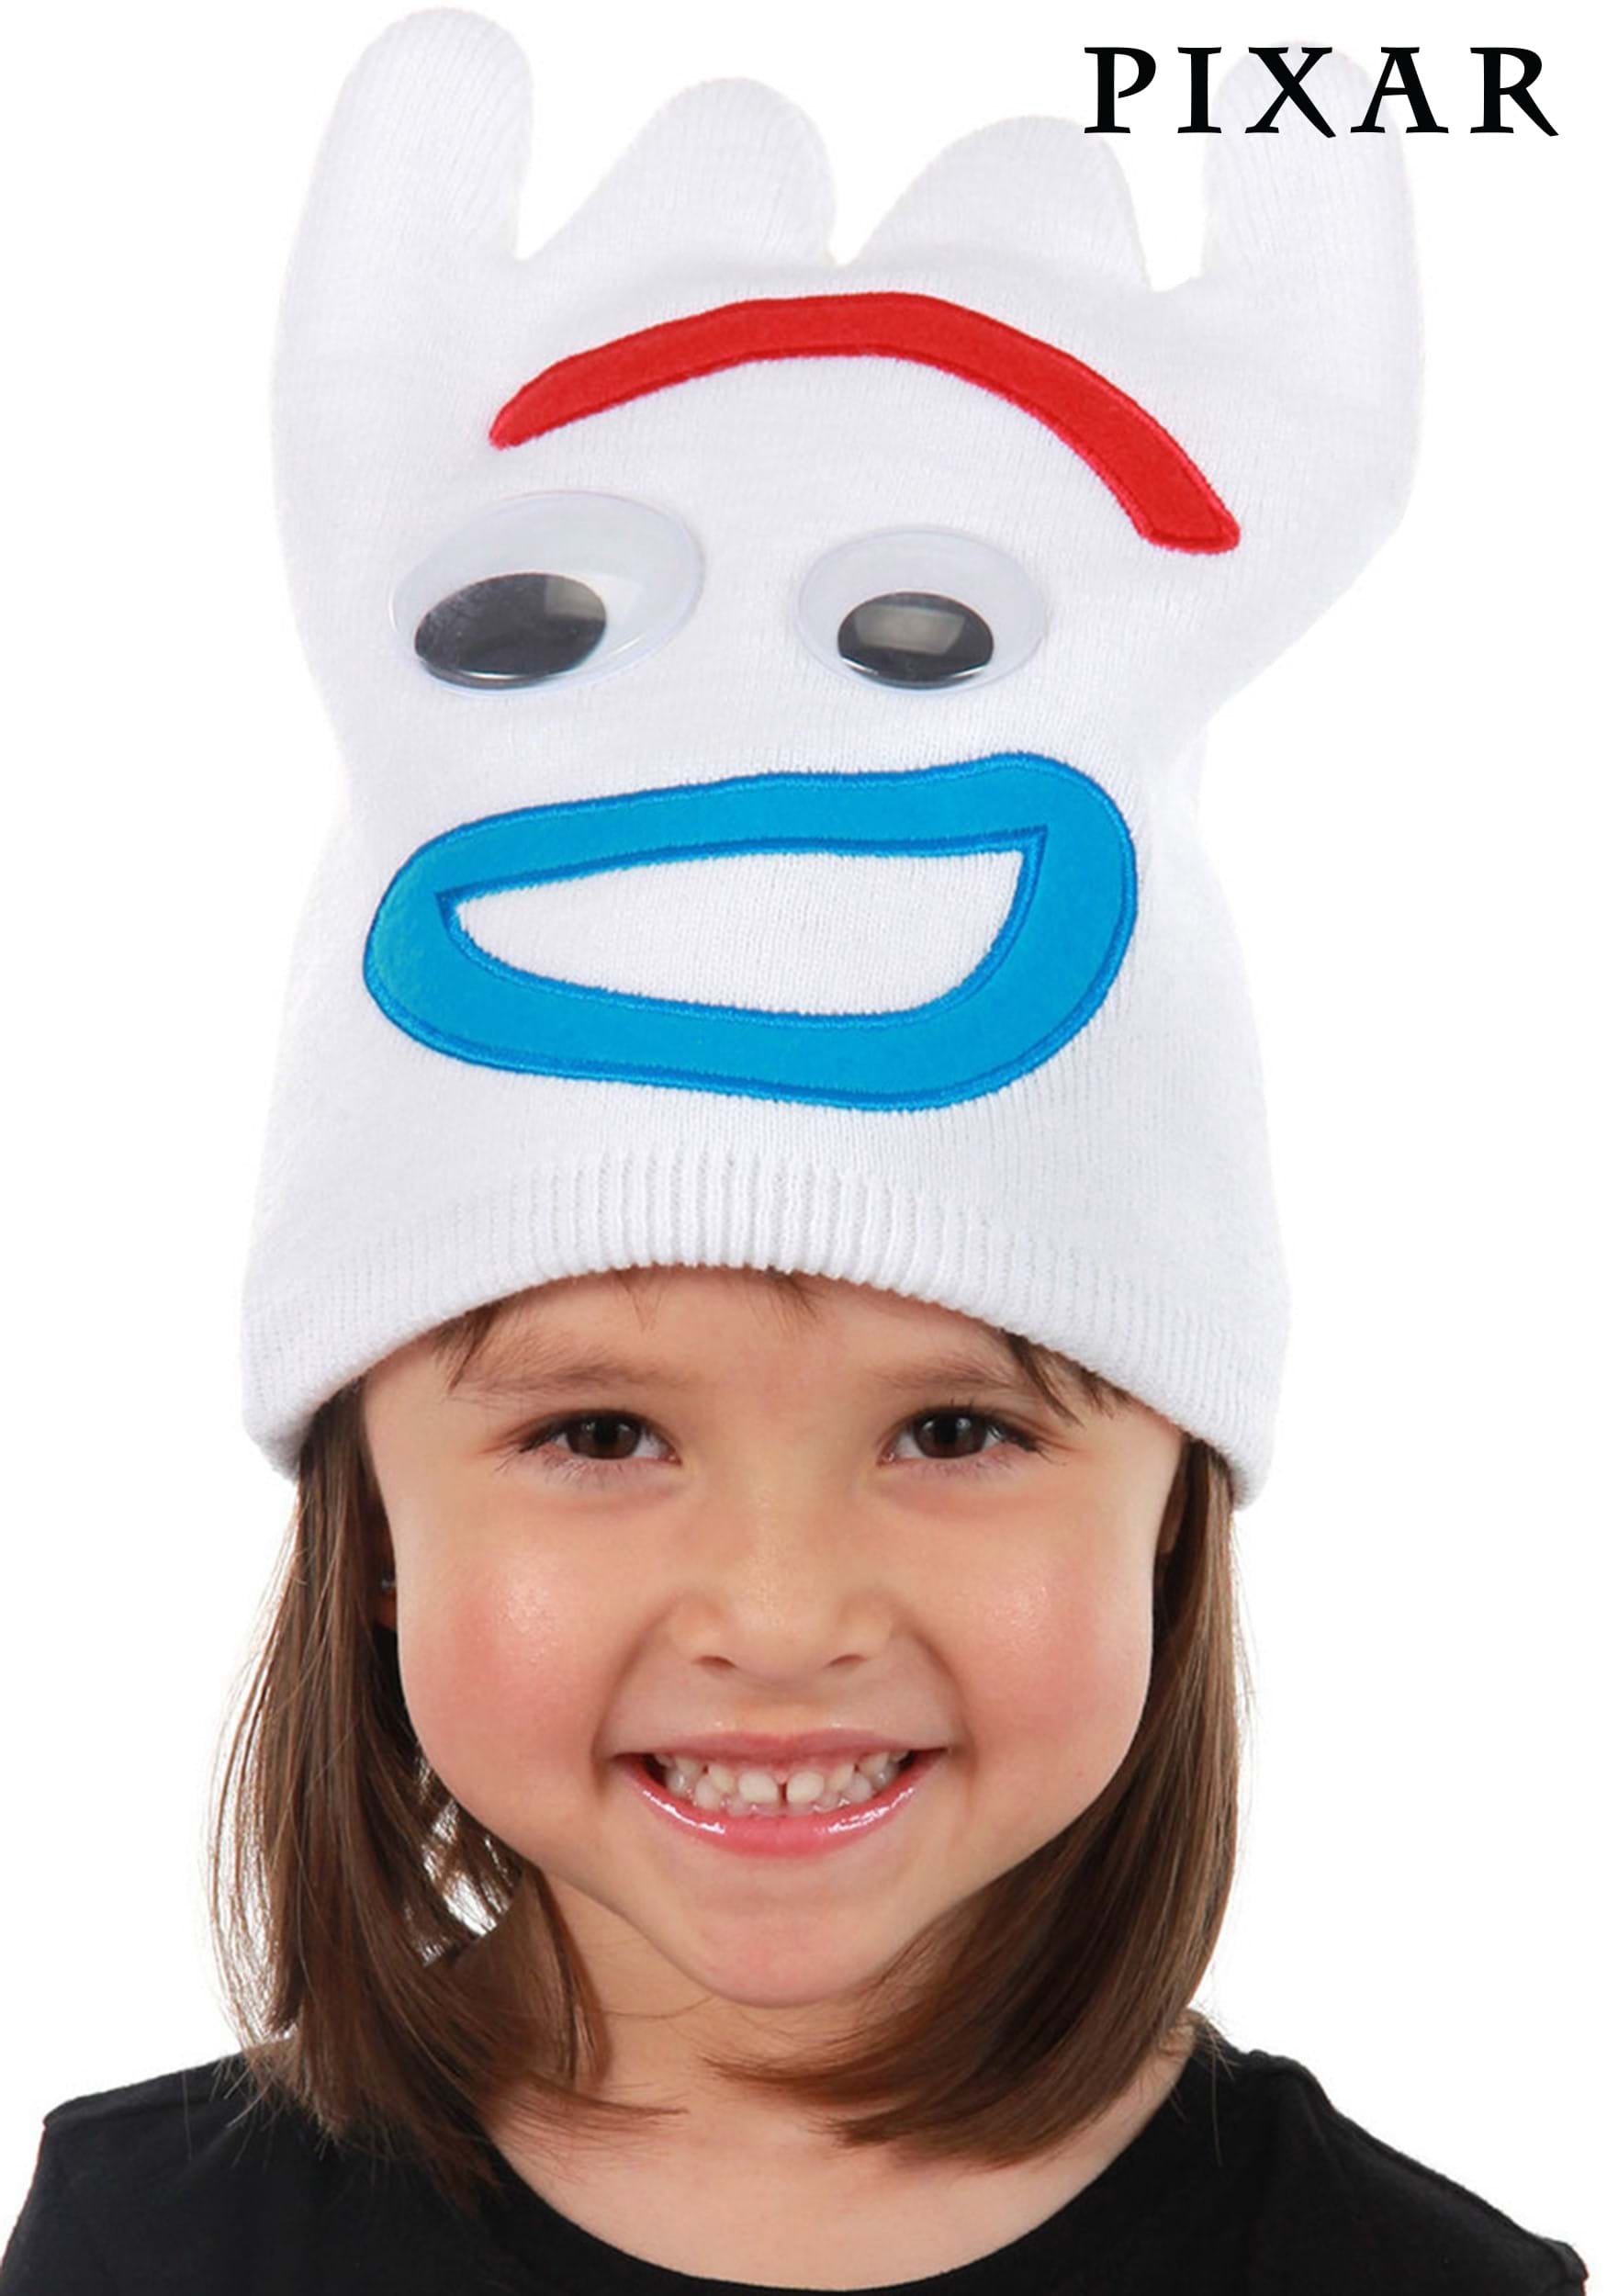 Toy Story - Bonnie and Forky  Toy story costumes, Baby girl halloween  costumes, Bonnie costume